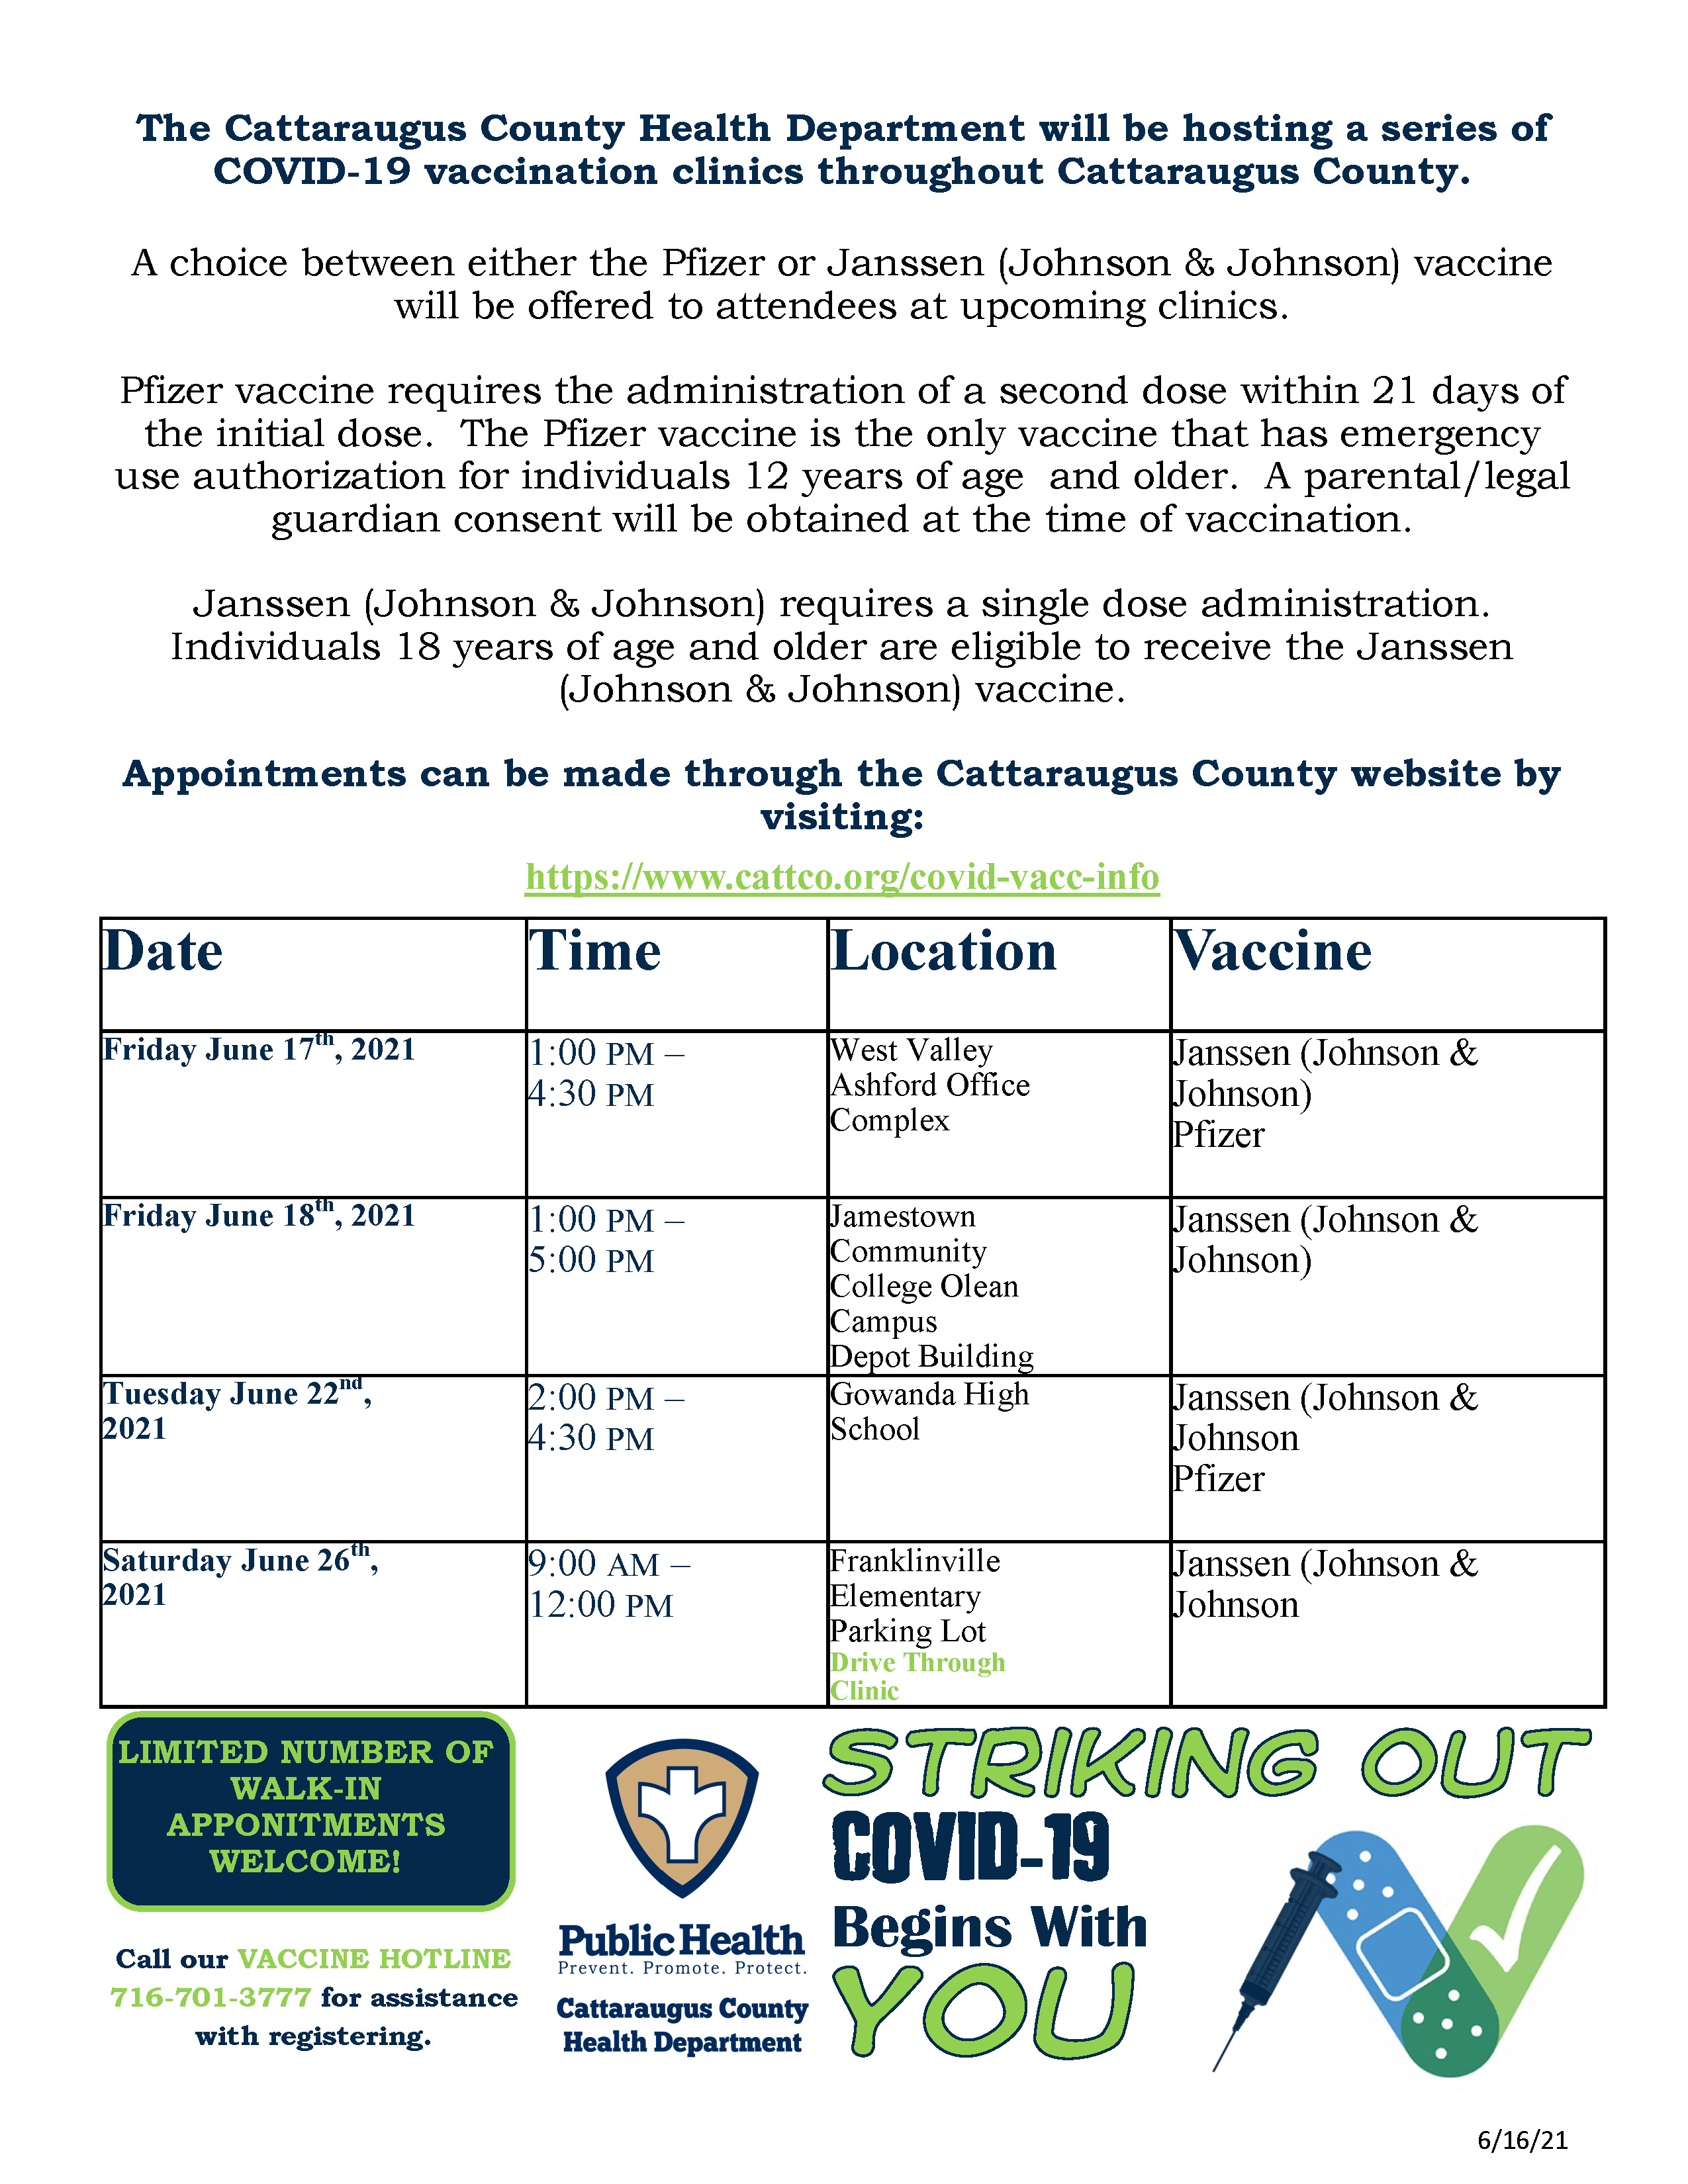 Flyer for upcoming COVID-19 Vaccination clinics (JPG format)